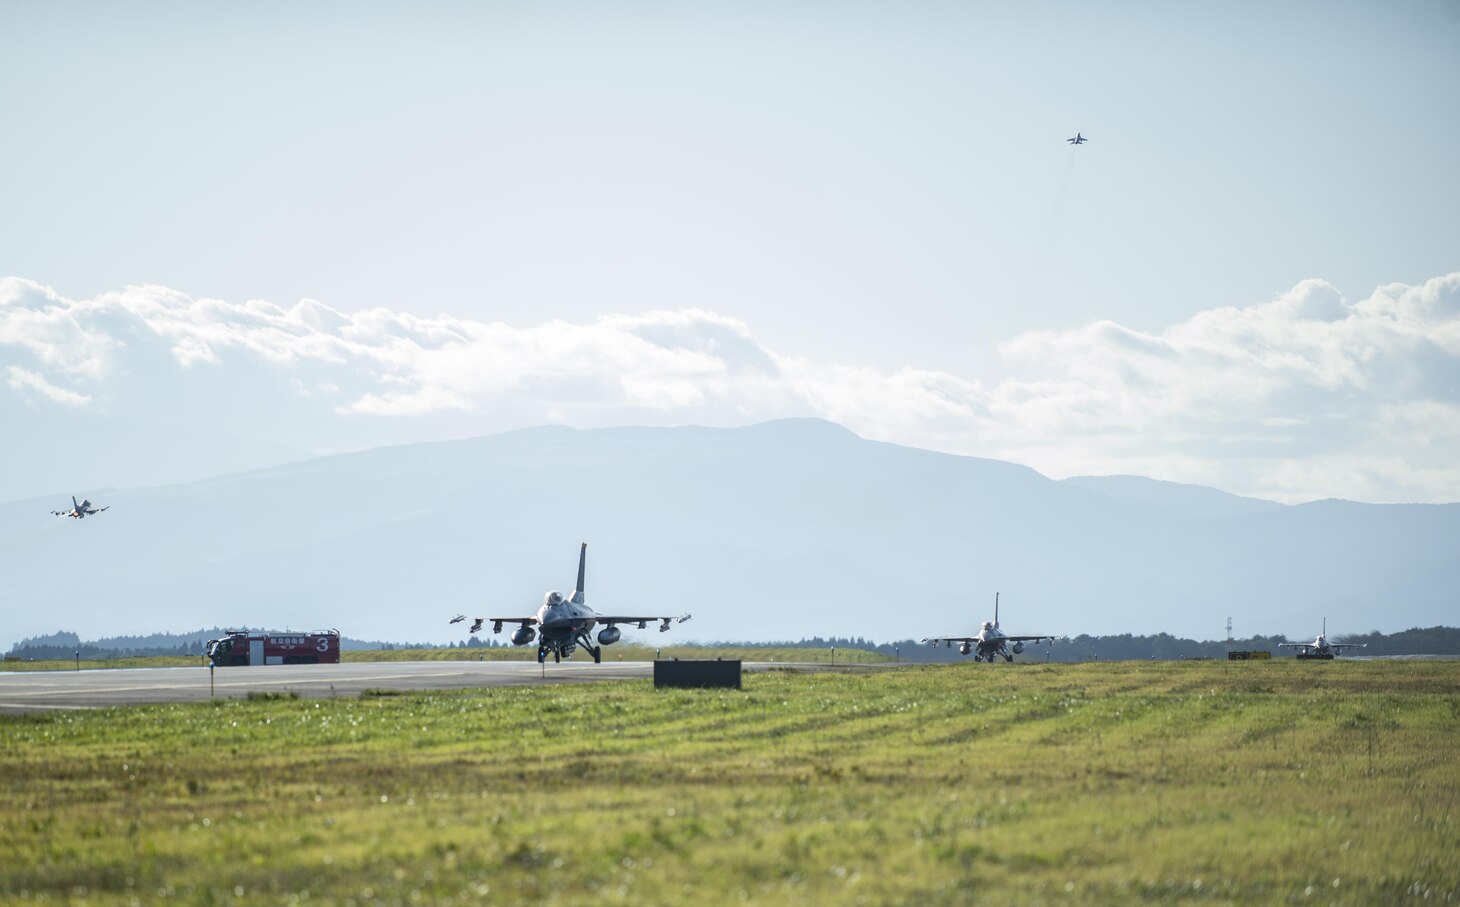 Vipers, Growlers integrate, enhance joint SEAD readiness